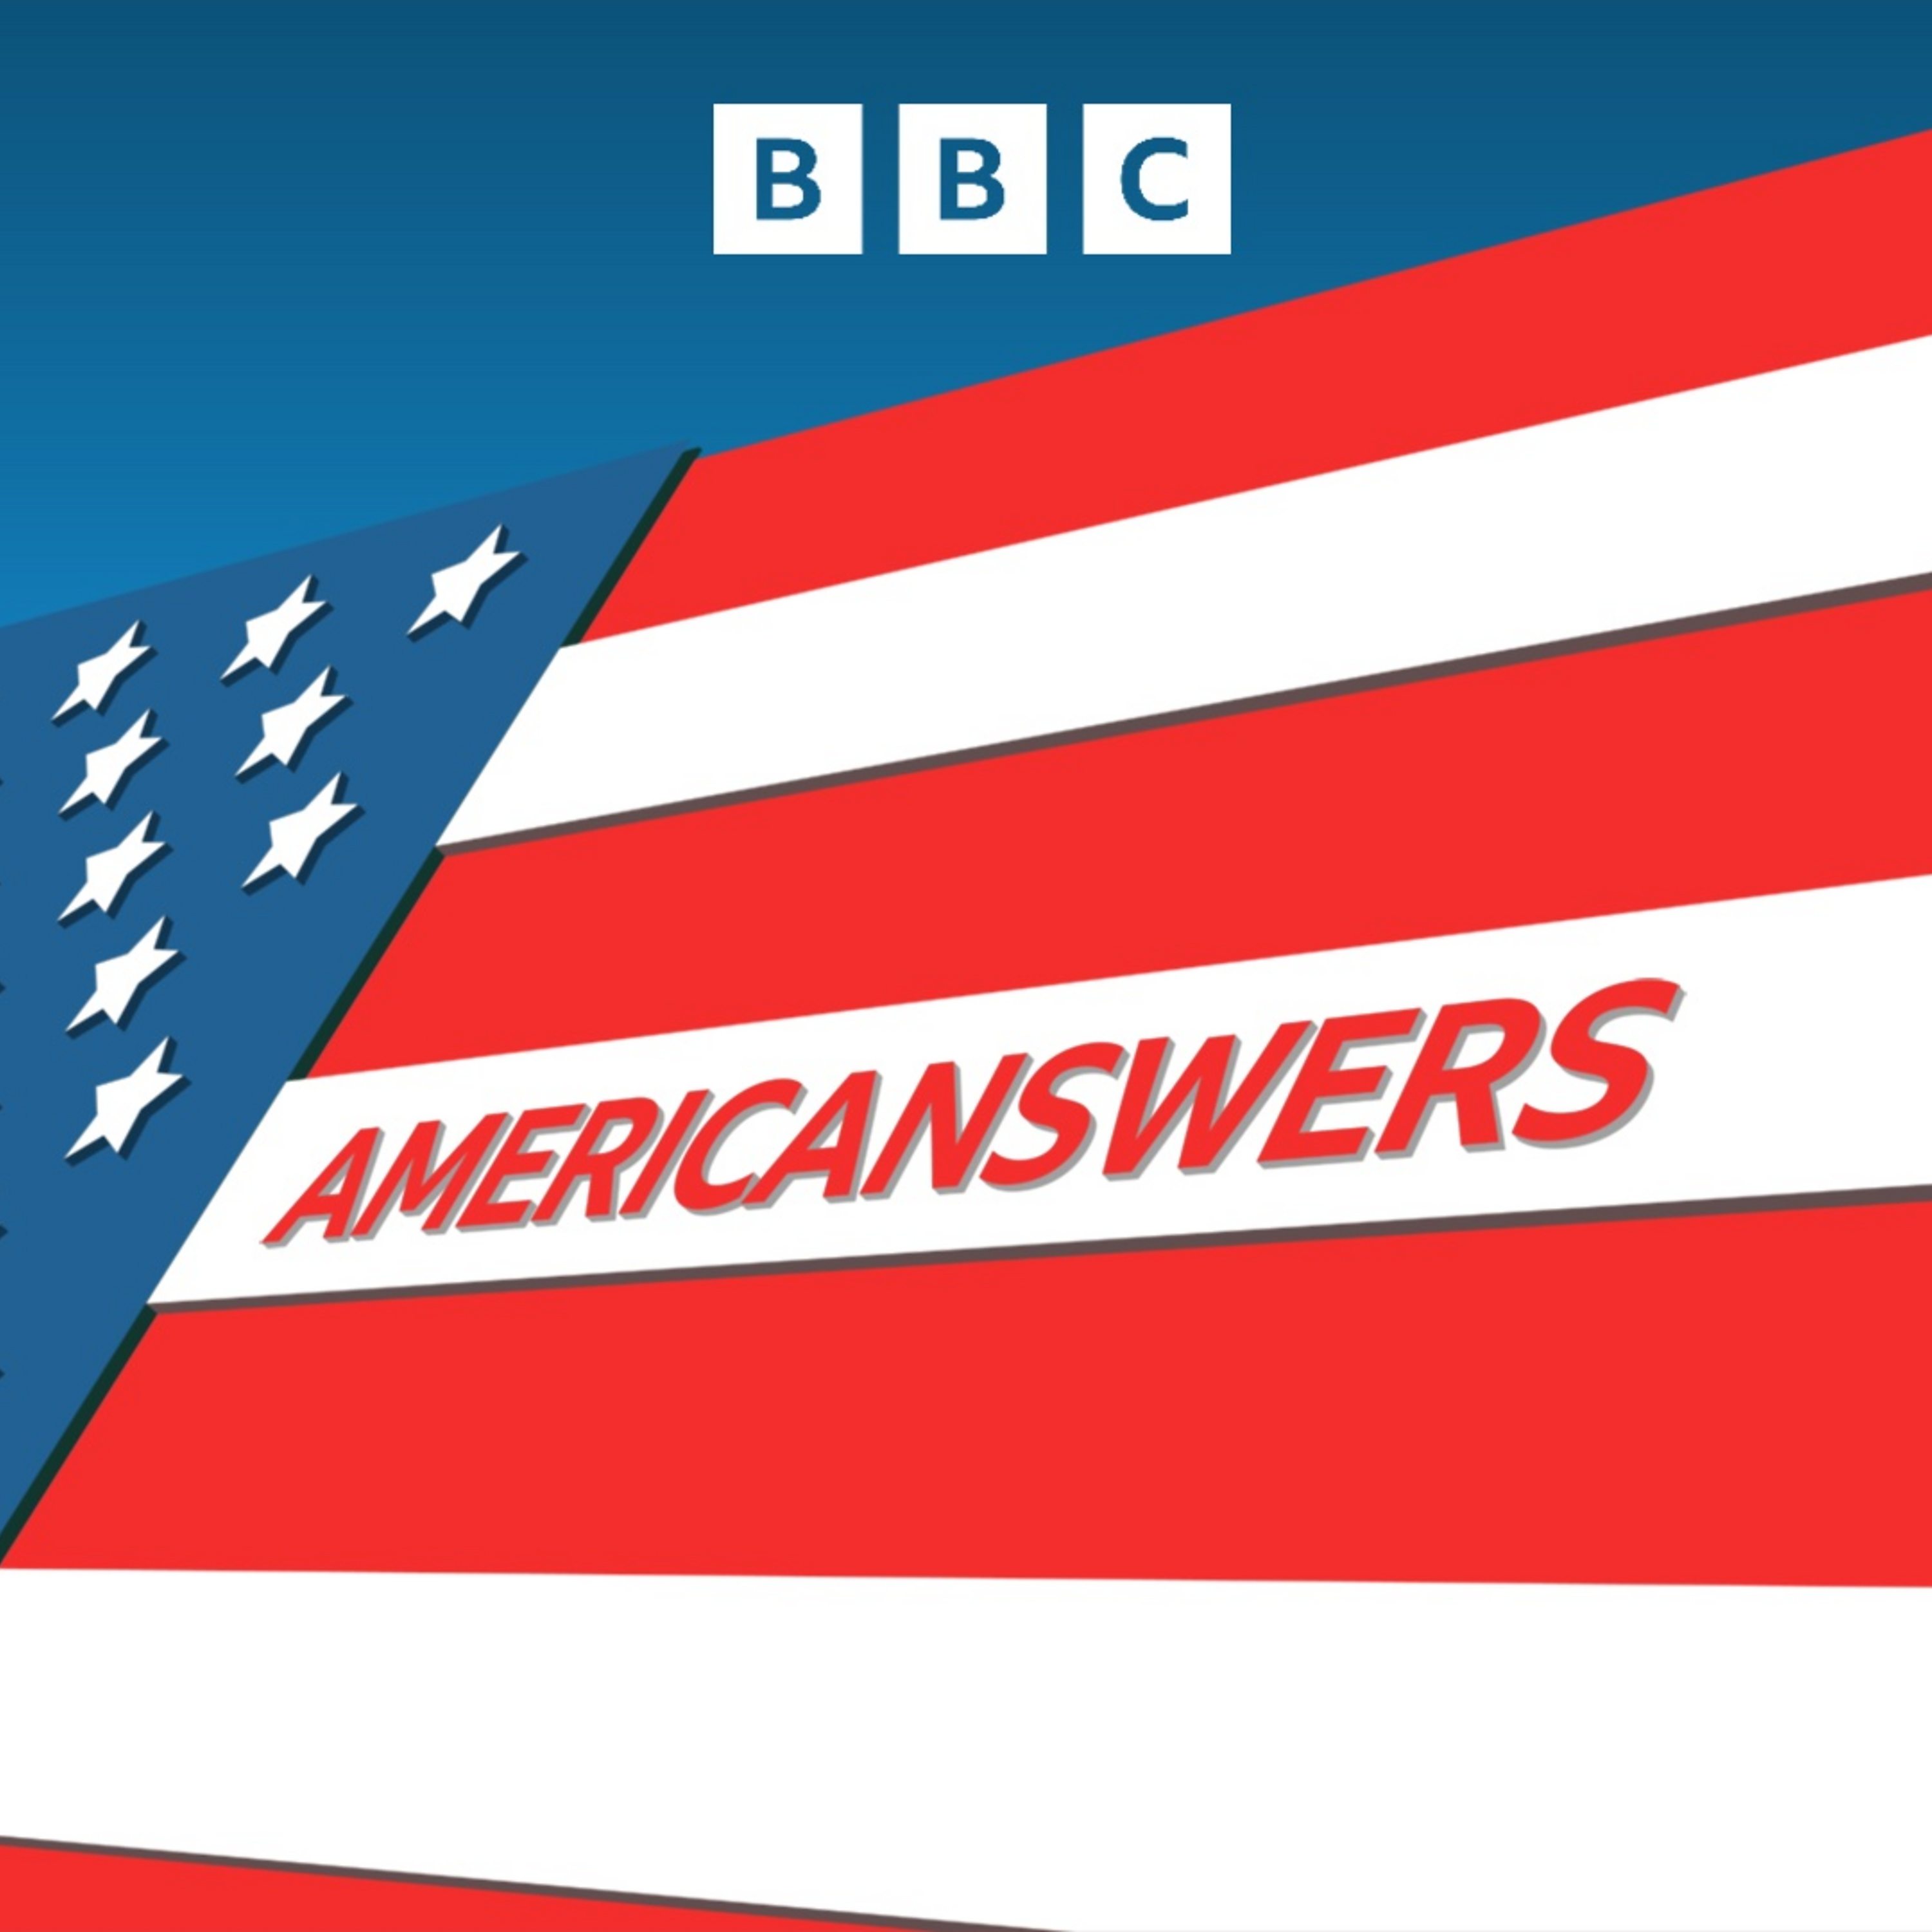 Americanswers! Marjorie Taylor Greene, disinformation campaigns, and who will run in 2028?